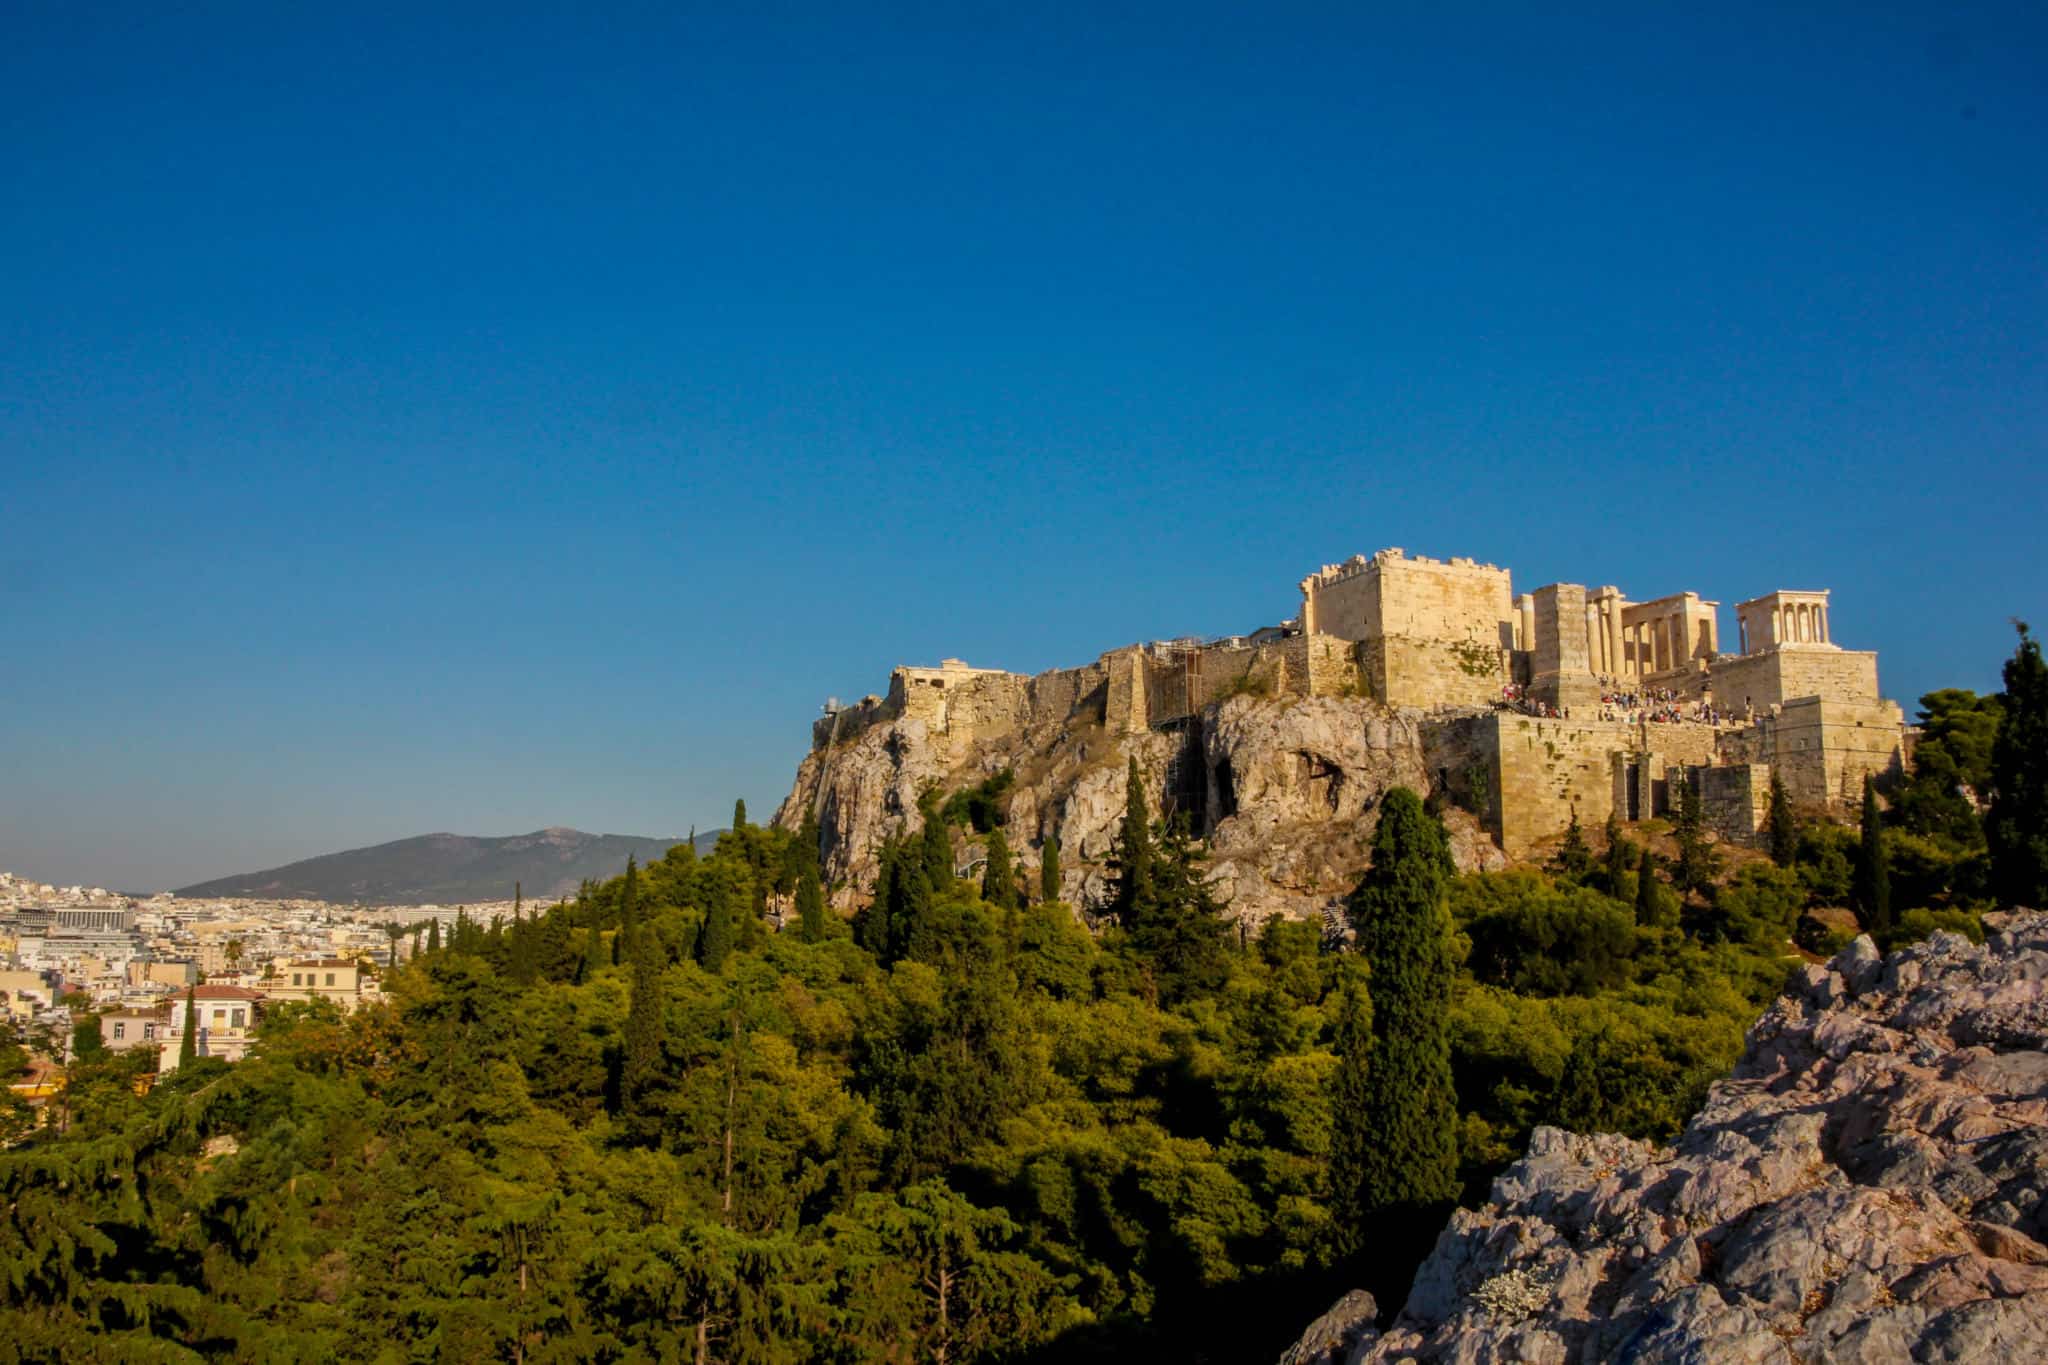 The Acropolis is one of the ruins in Athens